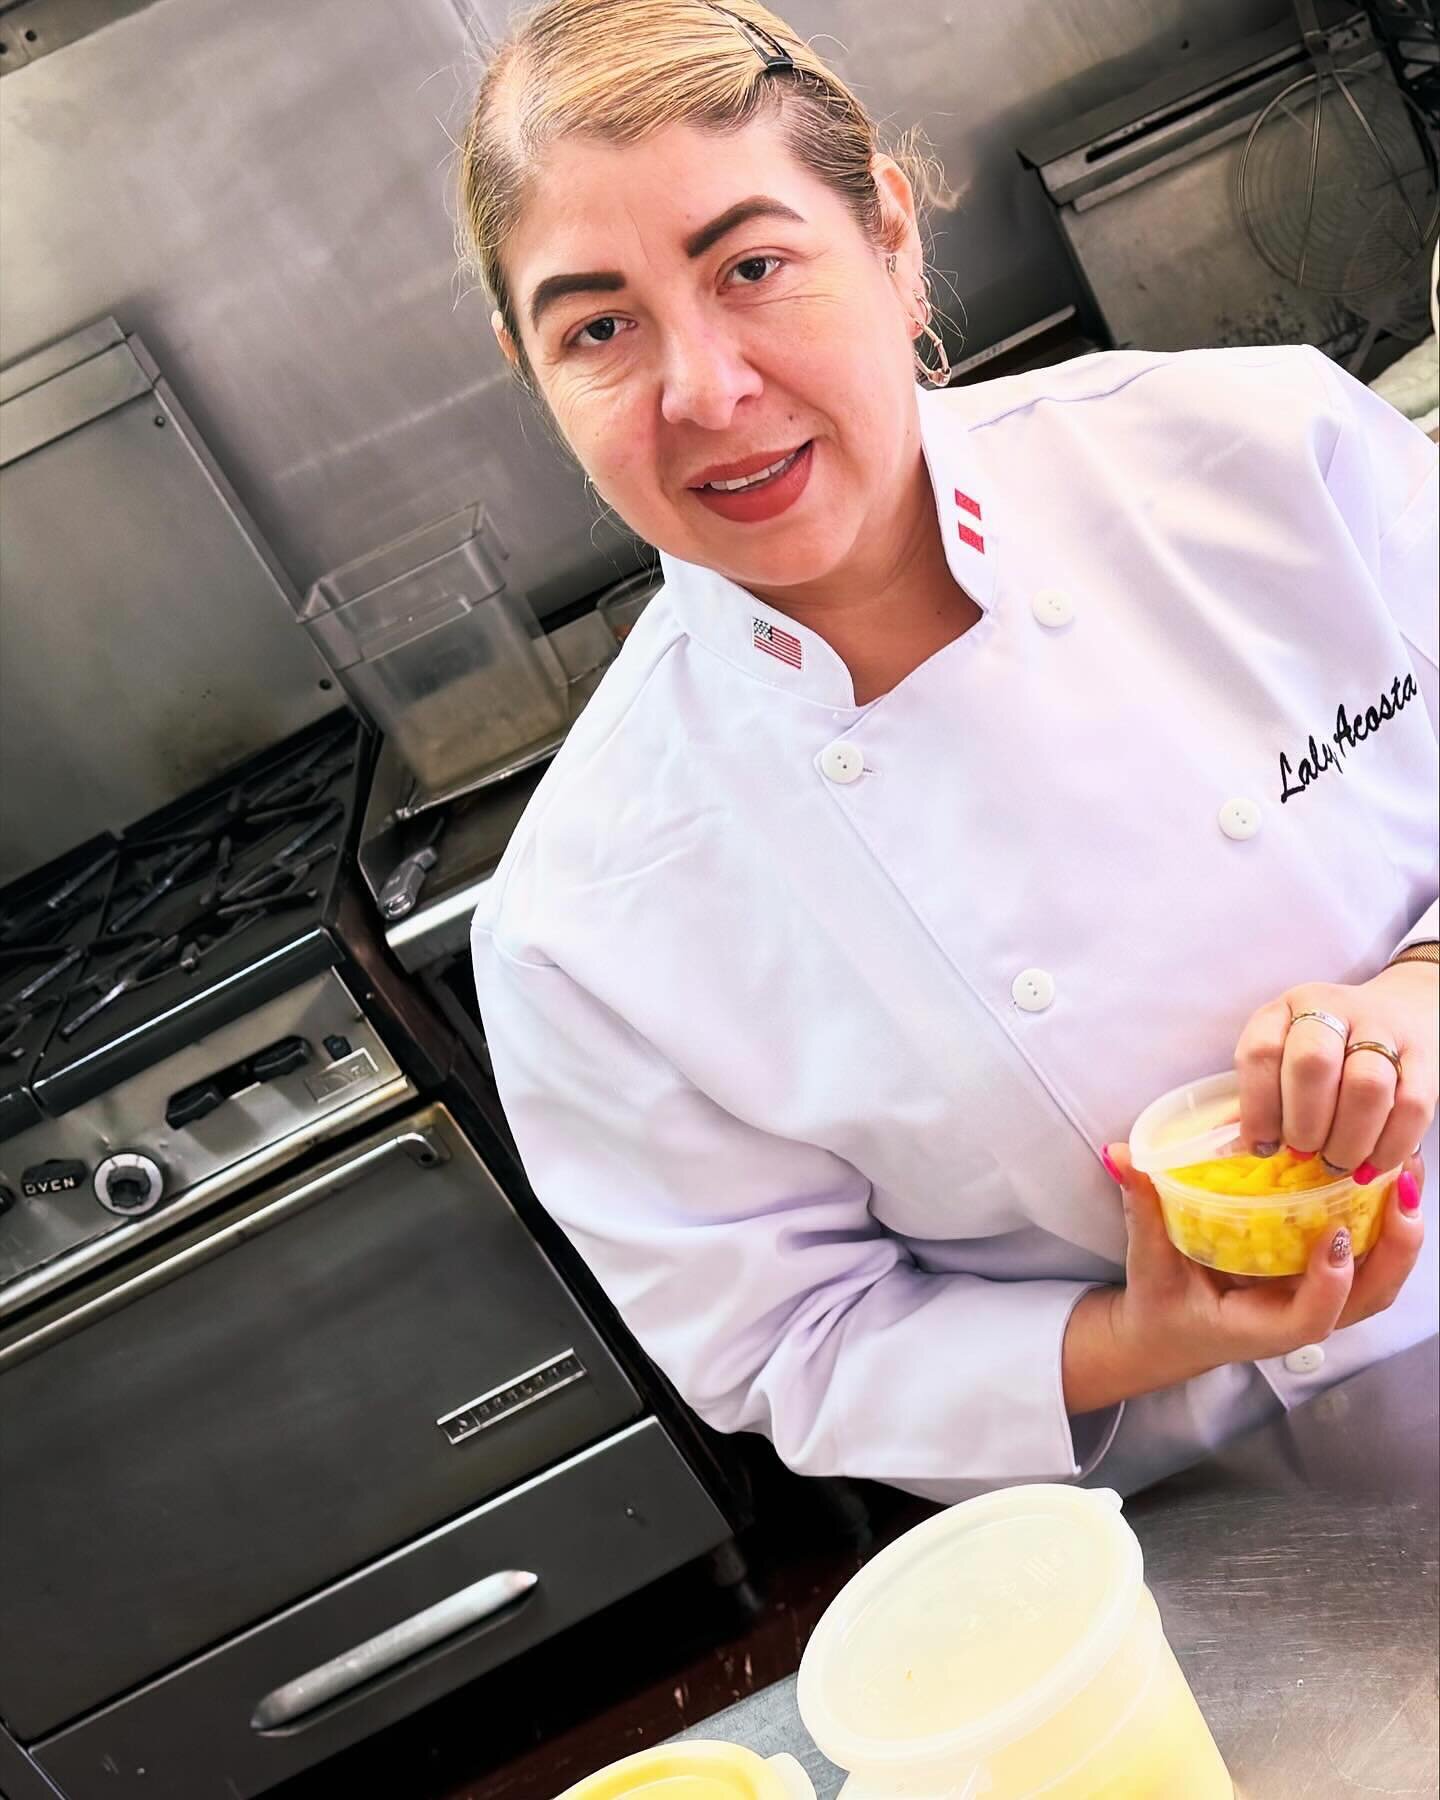 Kitchen 19 is welcoming Laly Acosta who is opening her Peruvian restaurant, Downtown Peru, on 2nd Street in Downtown Hammonton!  She is featuring a Peruvian tasting menu tonight and there are a few seats left at the 5pm Seating. Book your tickets at 